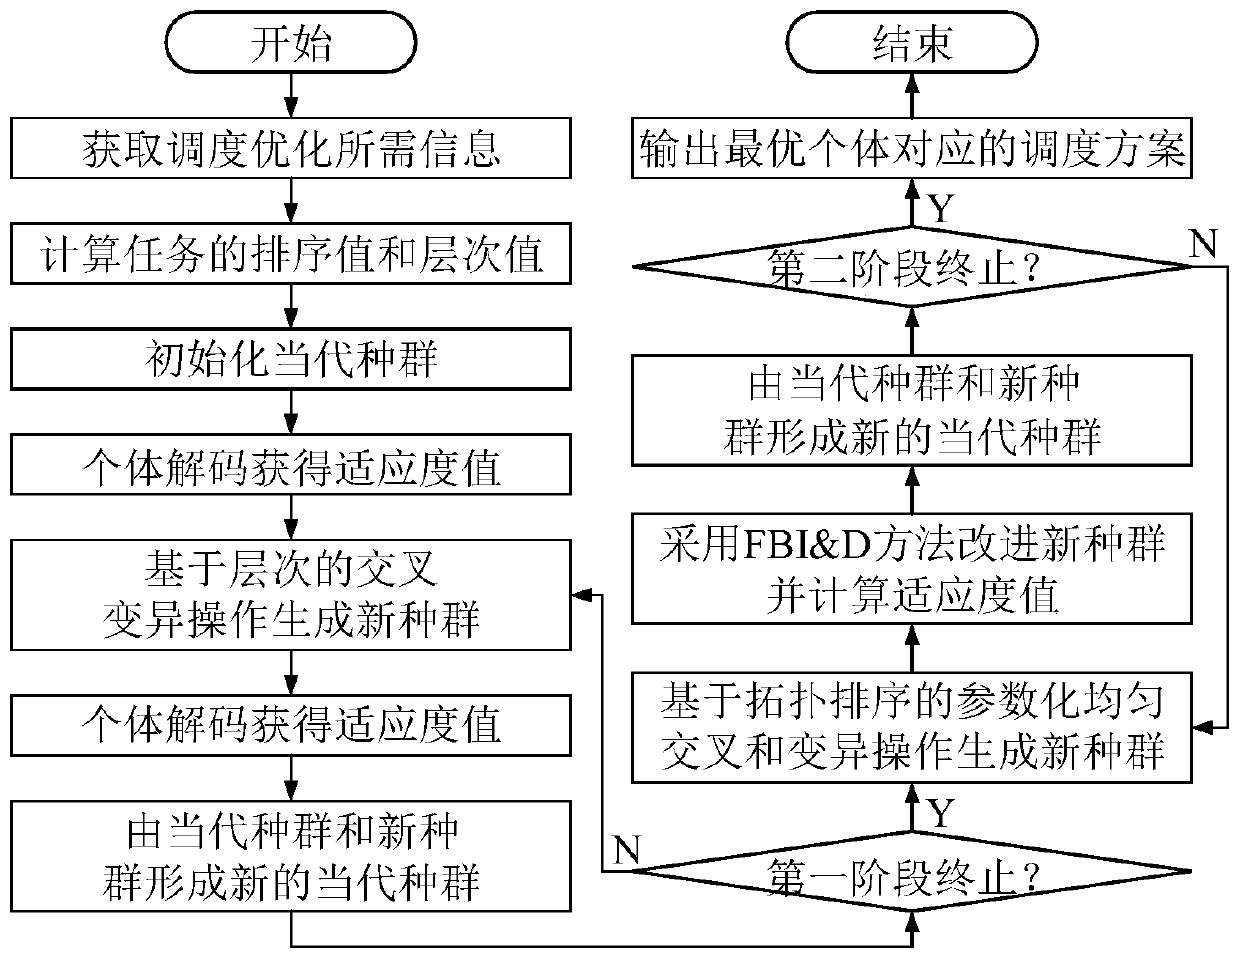 Resource-constrained project scheduling optimization method based on layered two-stage intelligent algorithm